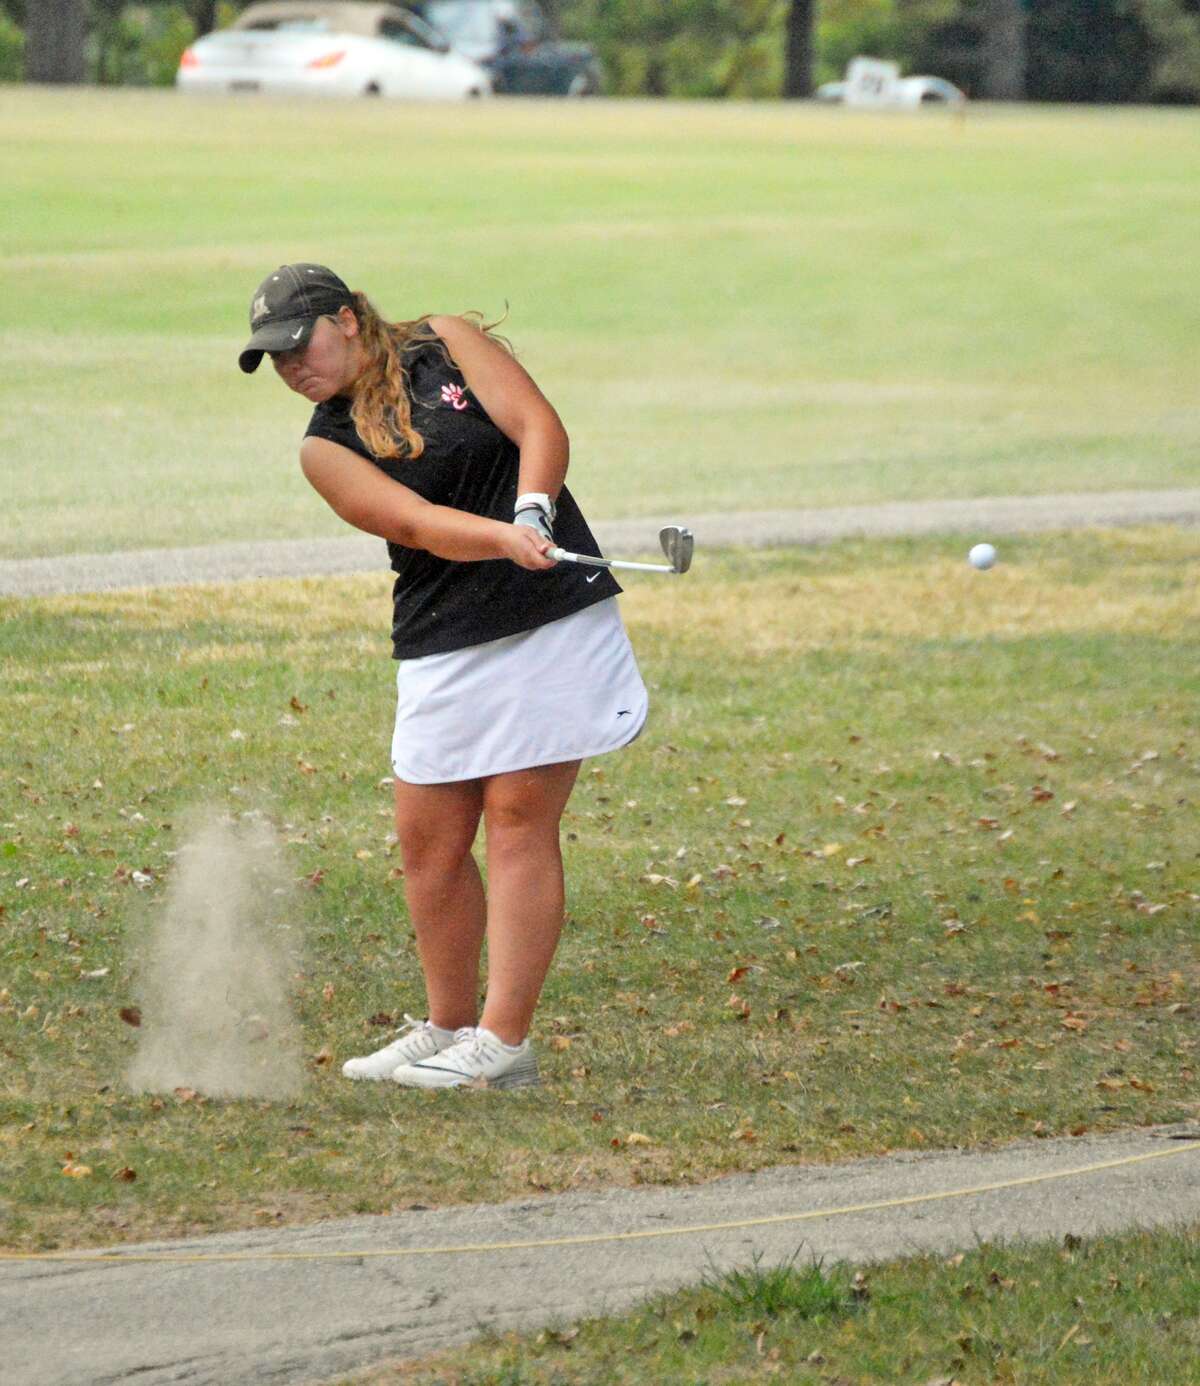 Edwardsville’s Carlie Van Patten hits her shot on to the green.